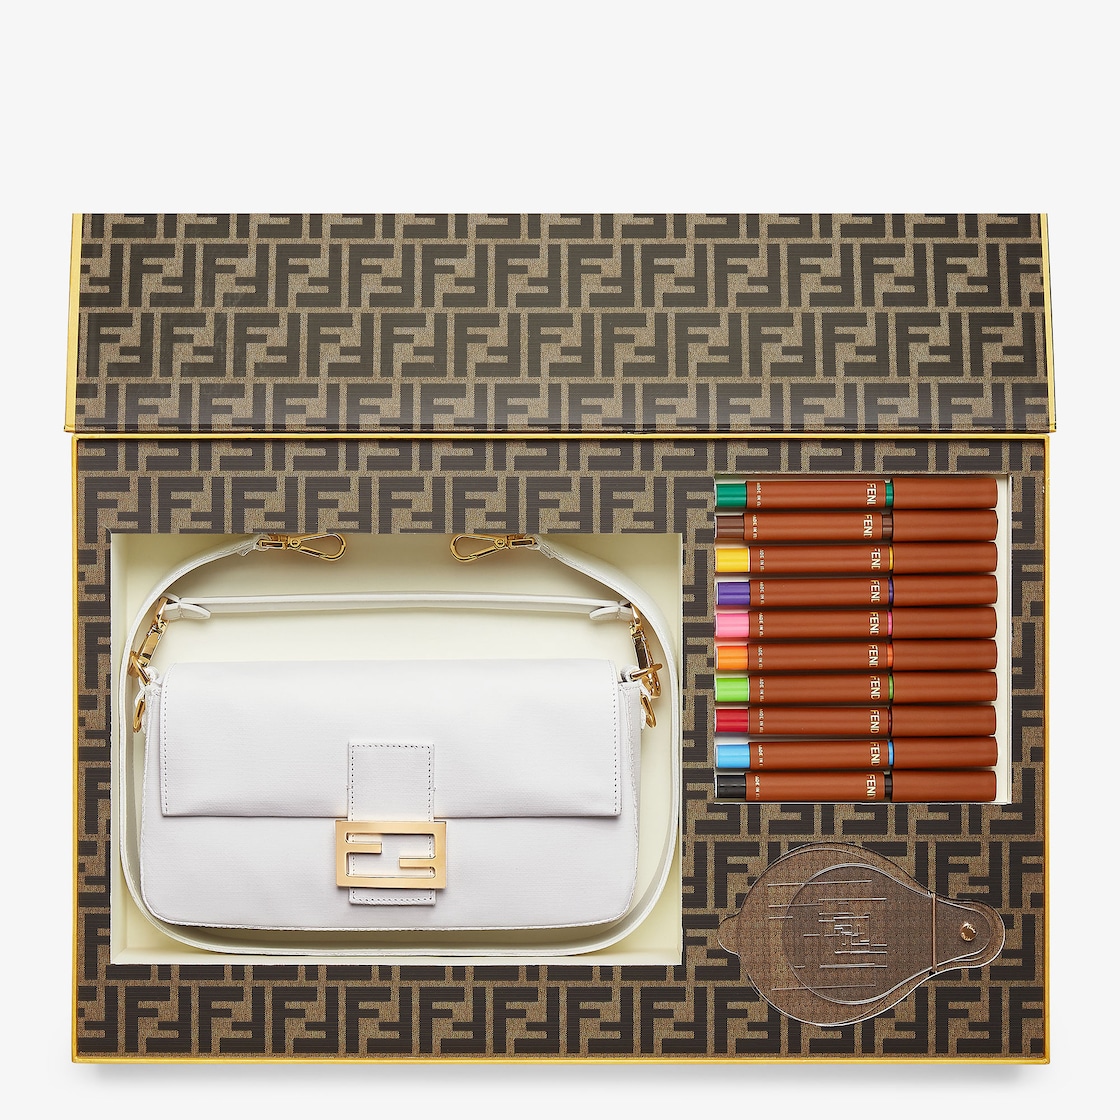 Happy 25th Birthday to the Fendi Baguette